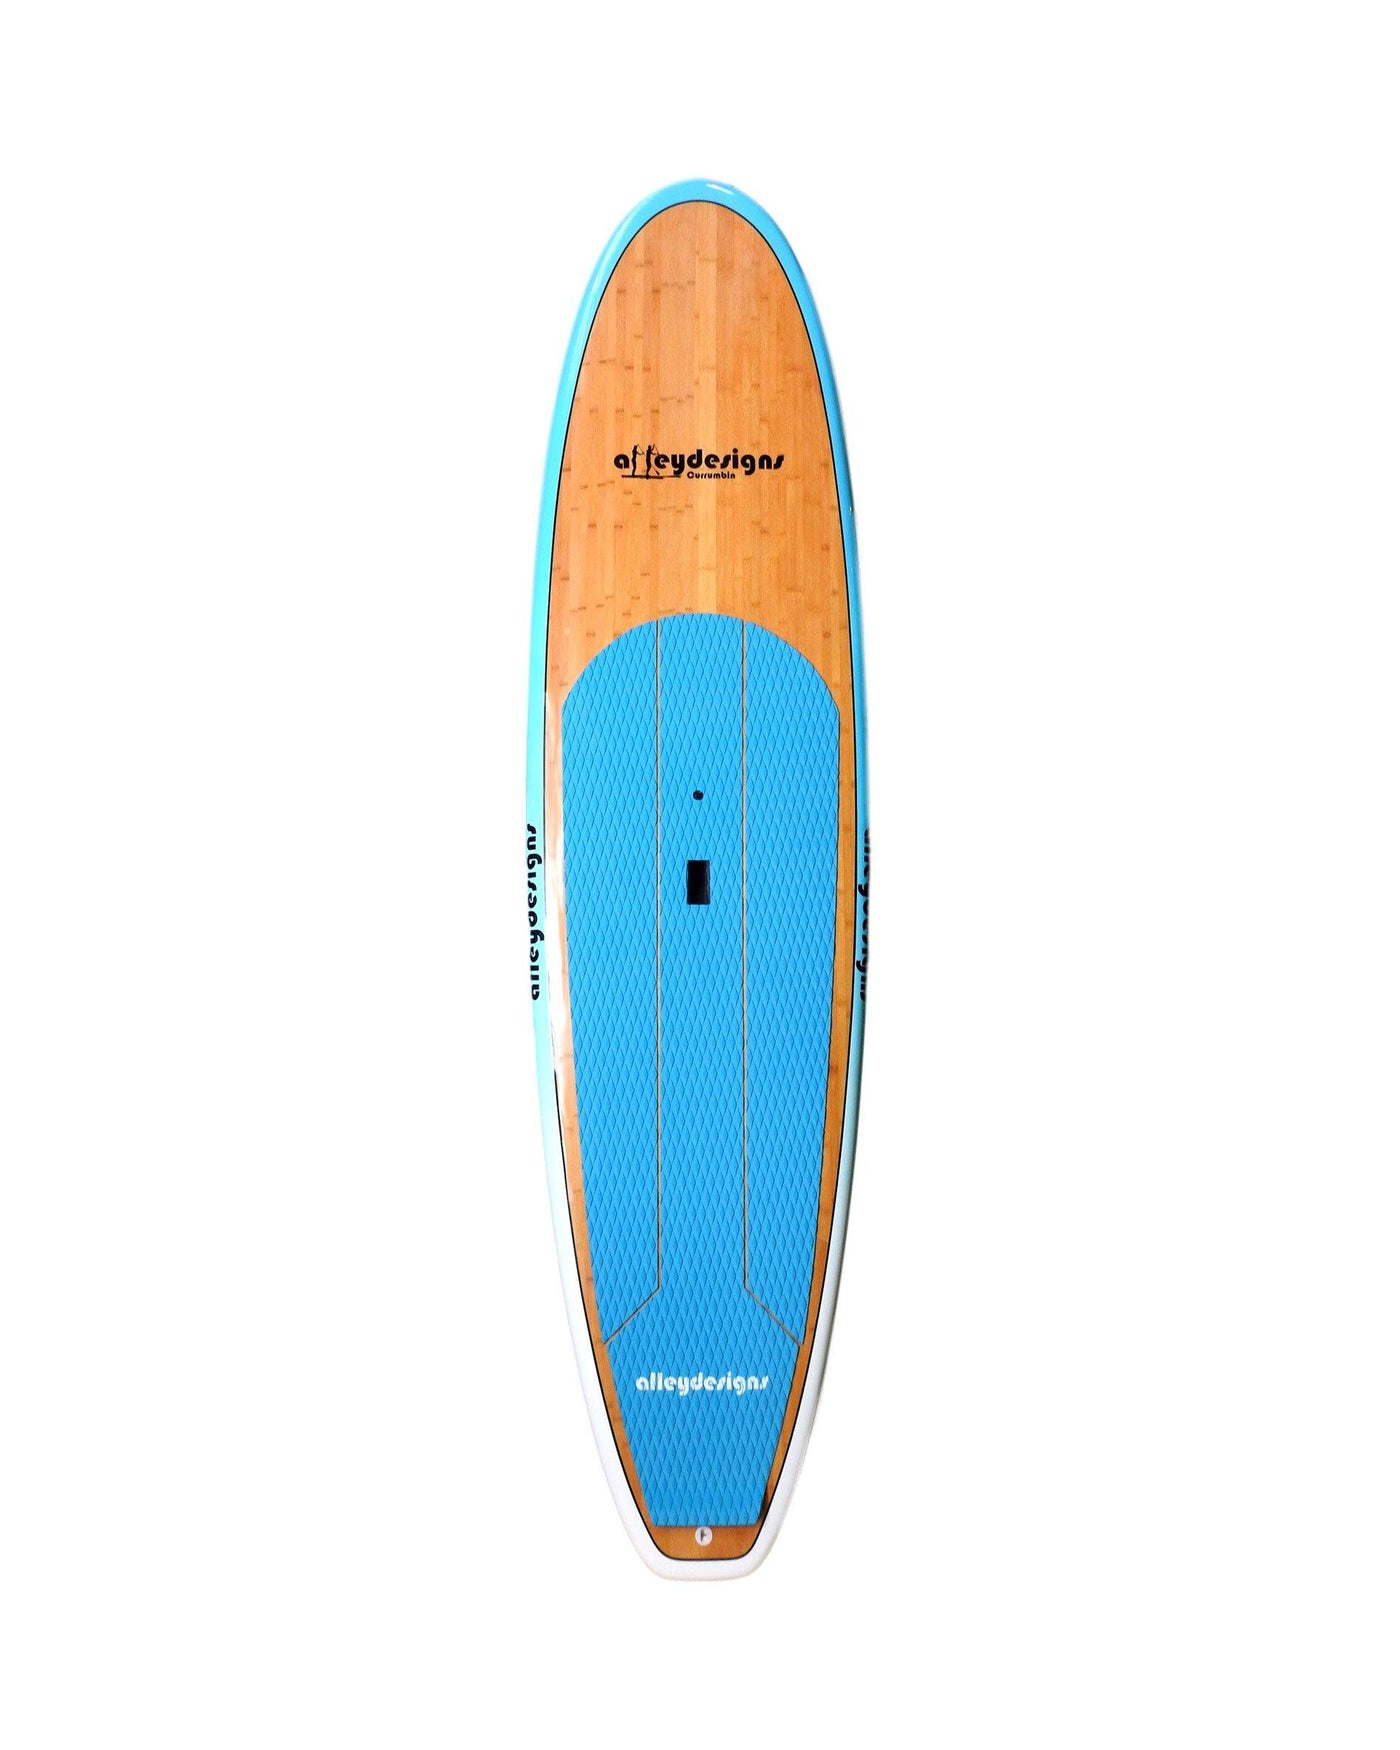 10'6" x 32" Bamboo Classic & Teal Alleydesigns SUP 11KG - Alleydesigns  Pty Ltd                                             ABN: 44165571264